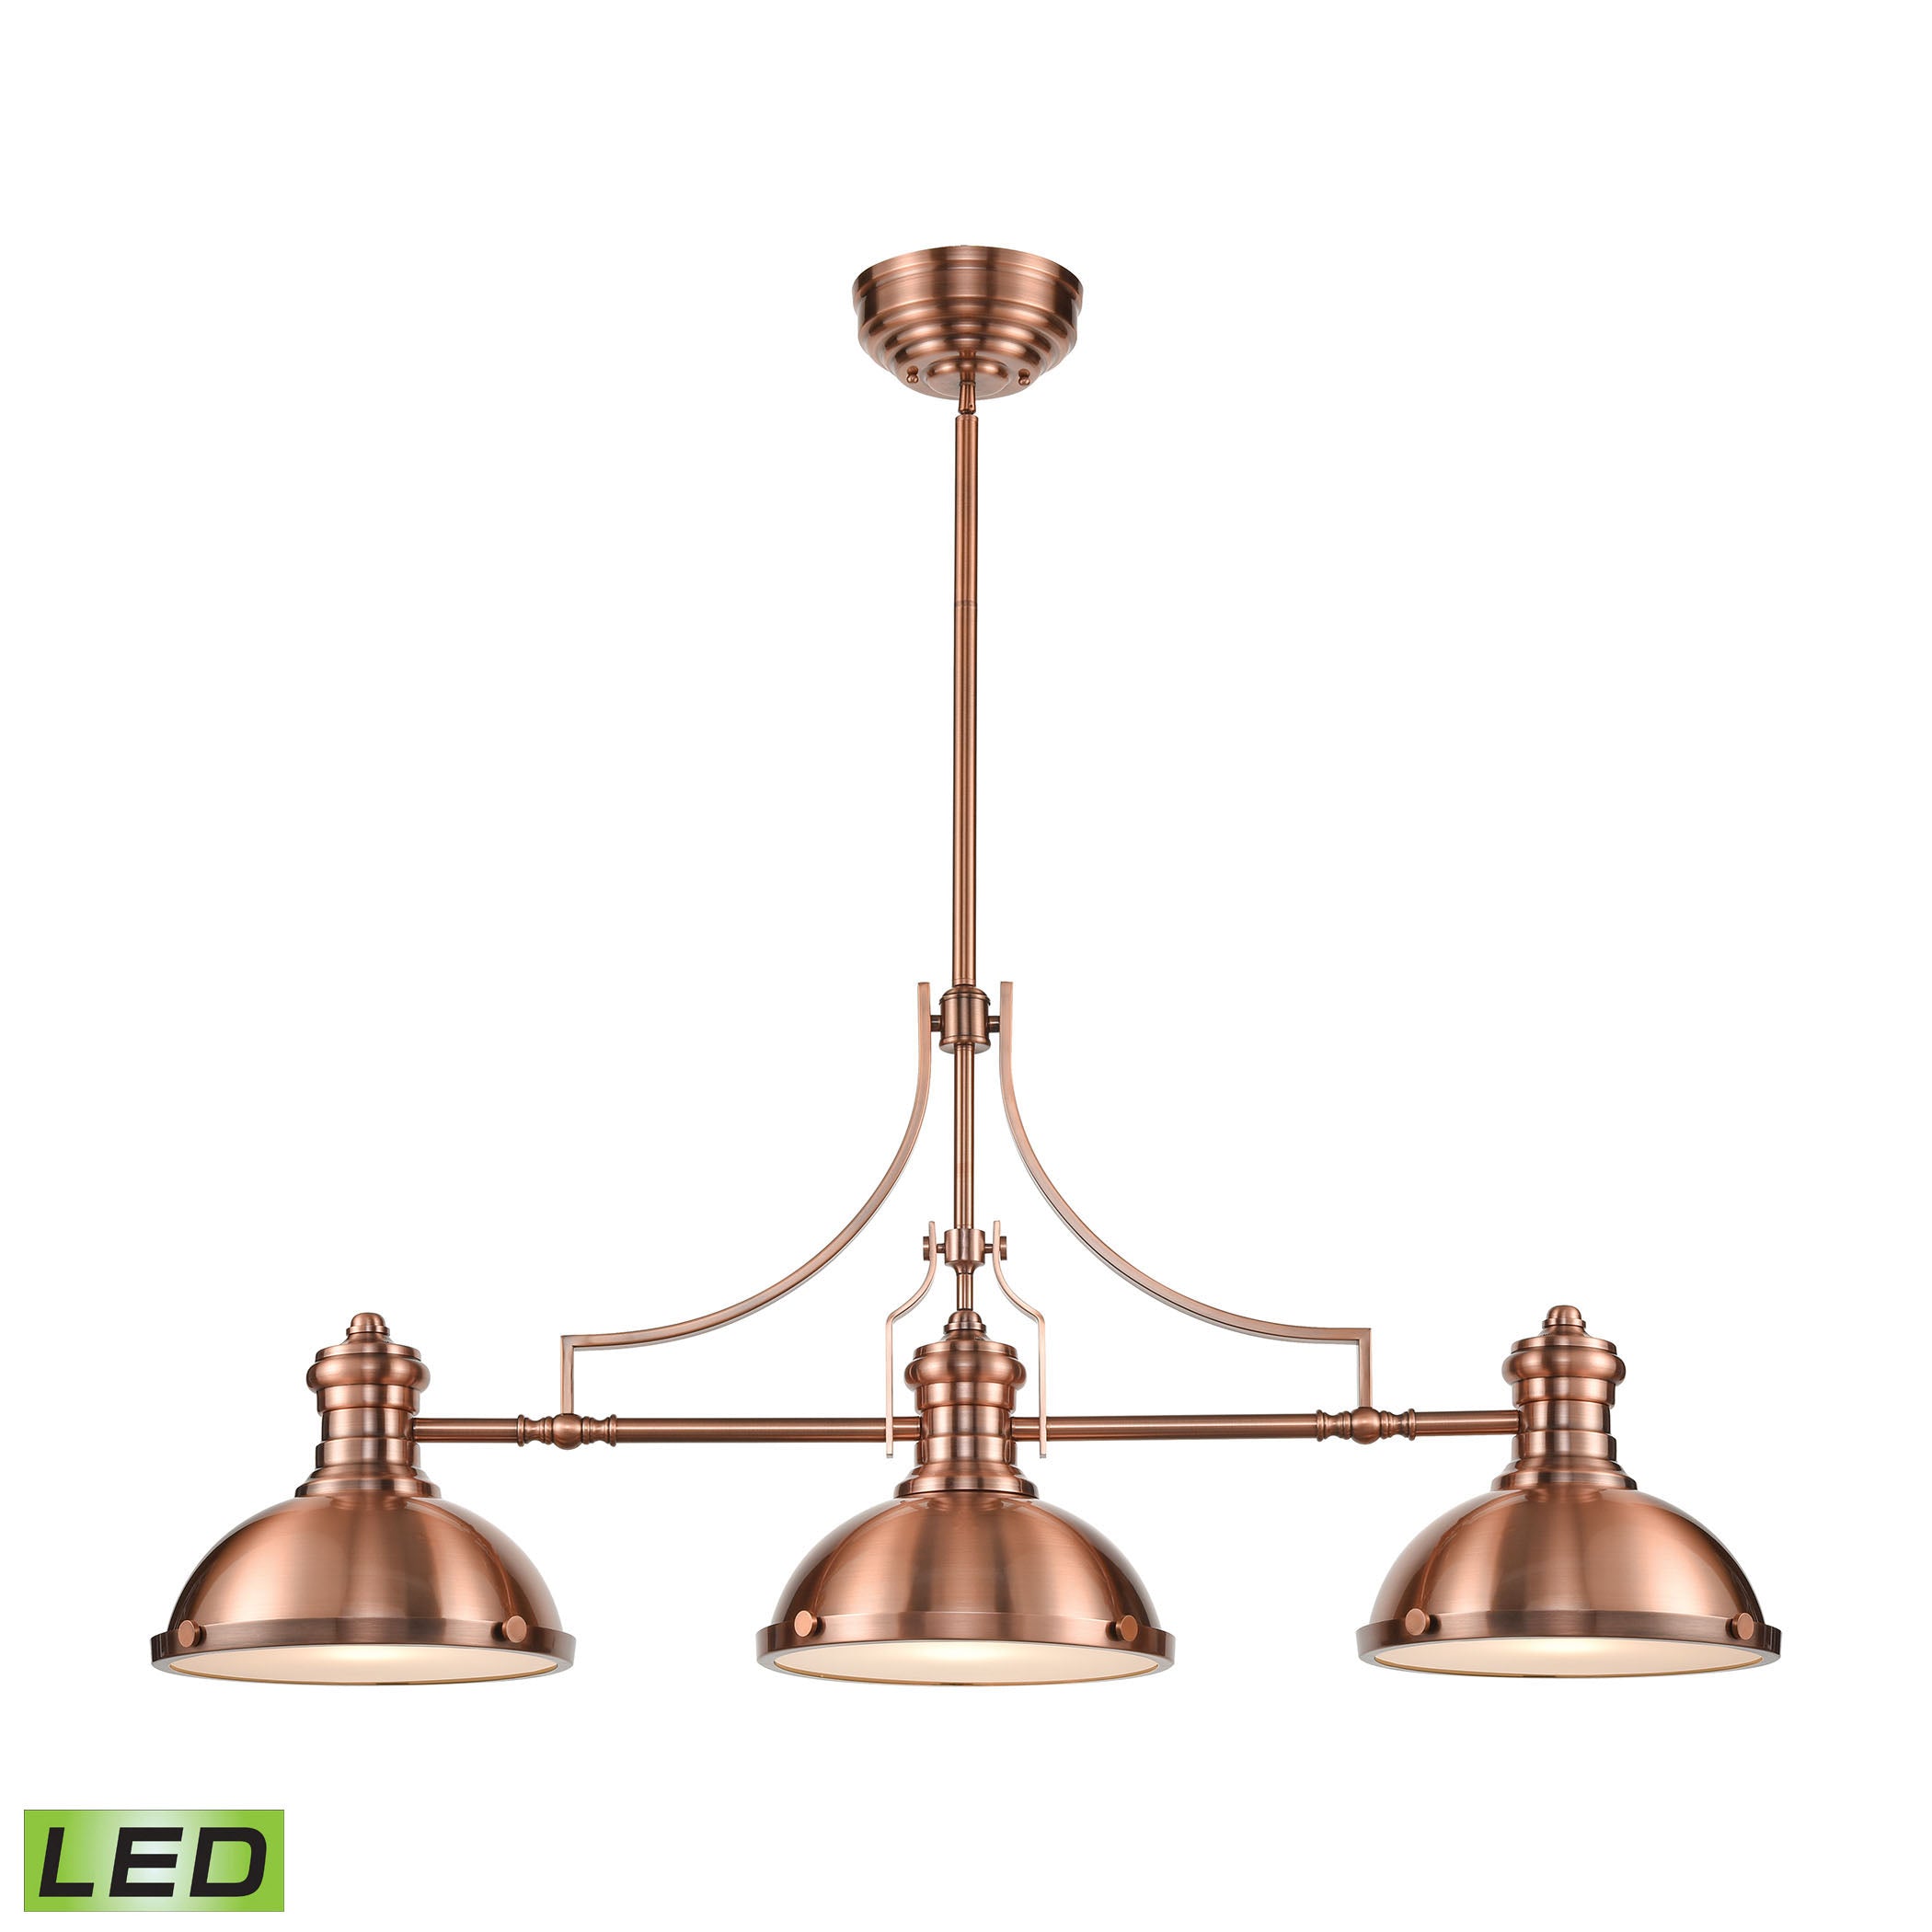 ELK Lighting 66145-3-LED Chadwick 3-Light Island Light in Antique Copper with Matching Shade - Includes LED Bulbs